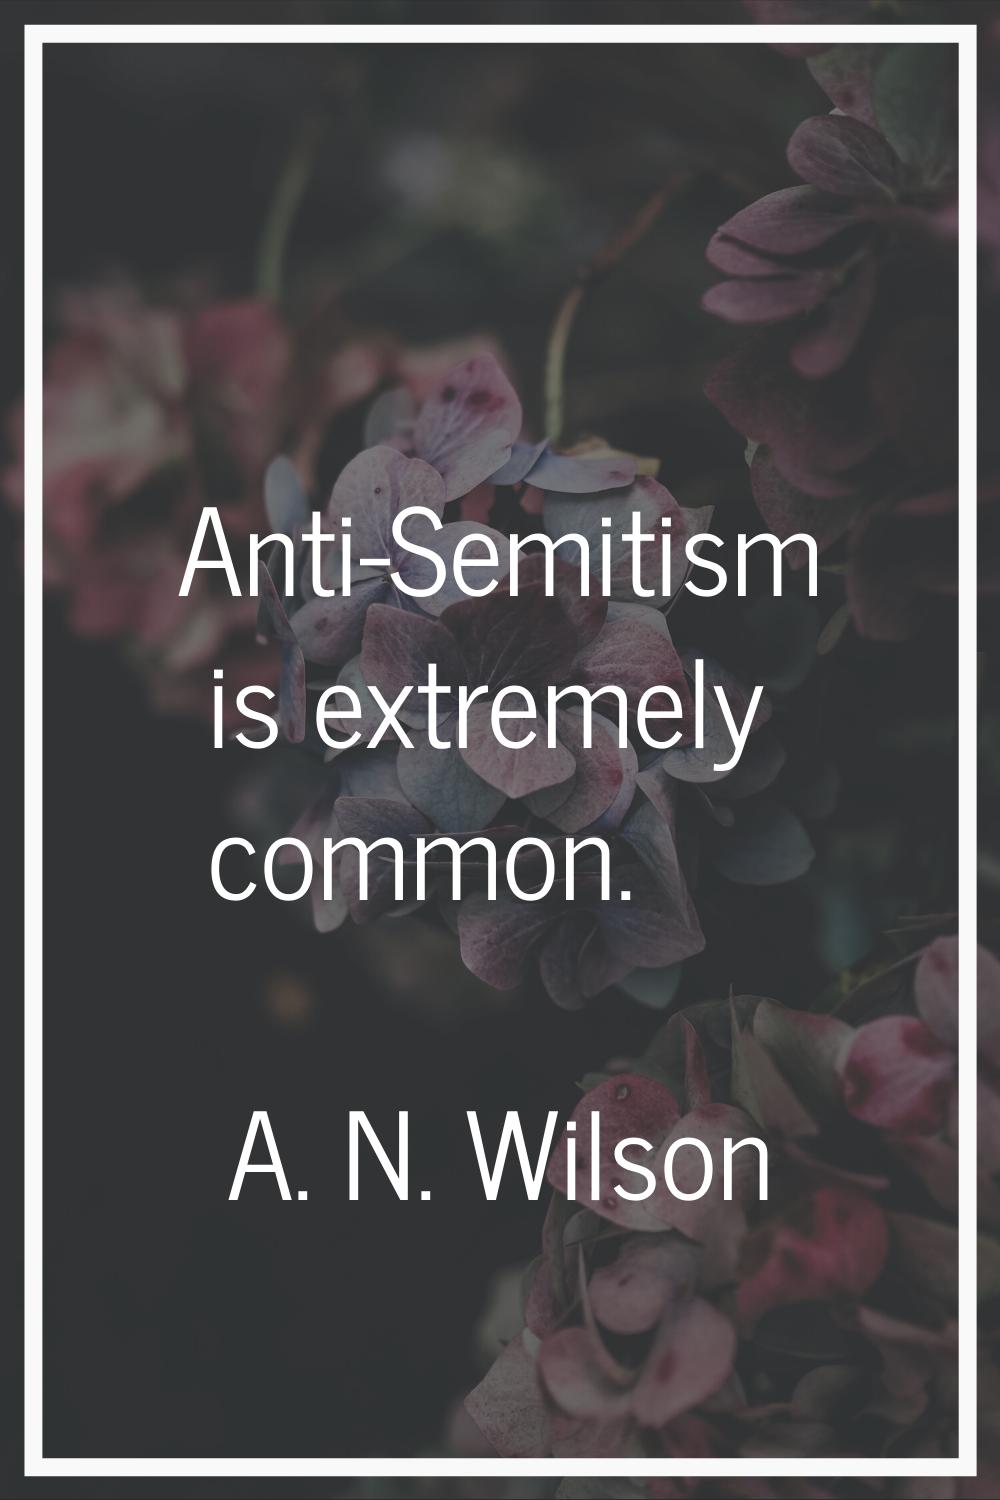 Anti-Semitism is extremely common.